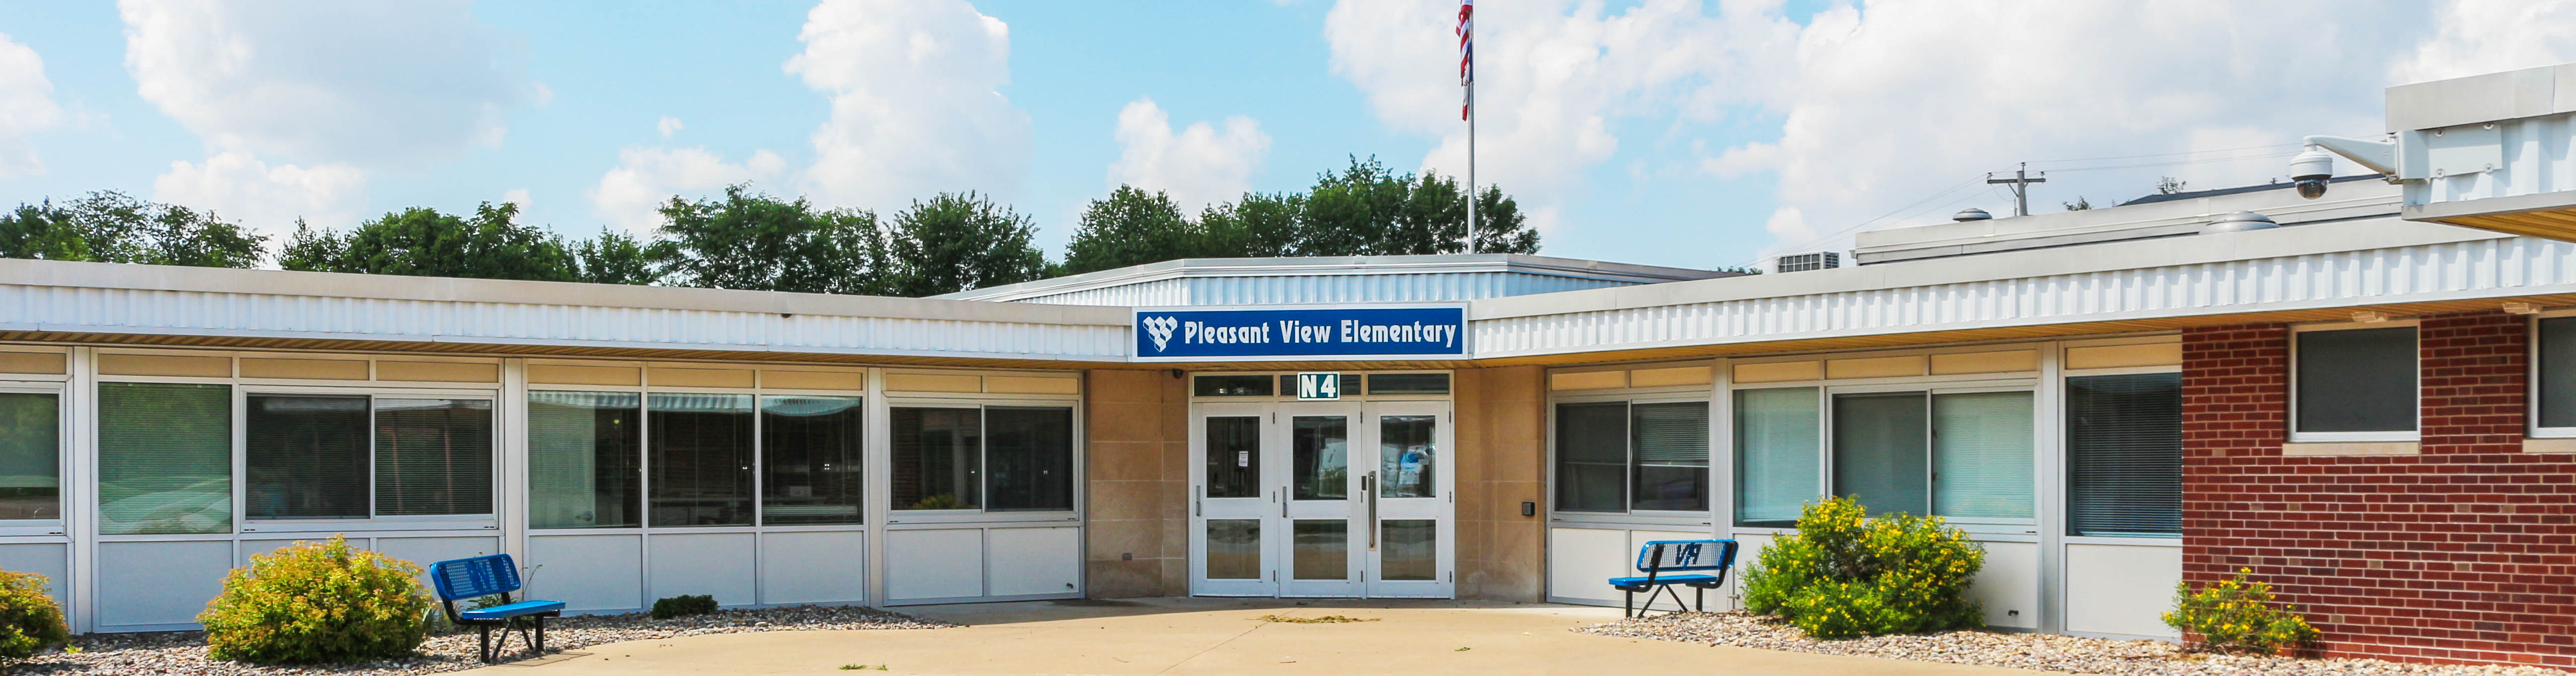 Pleasant View Elementary Building 